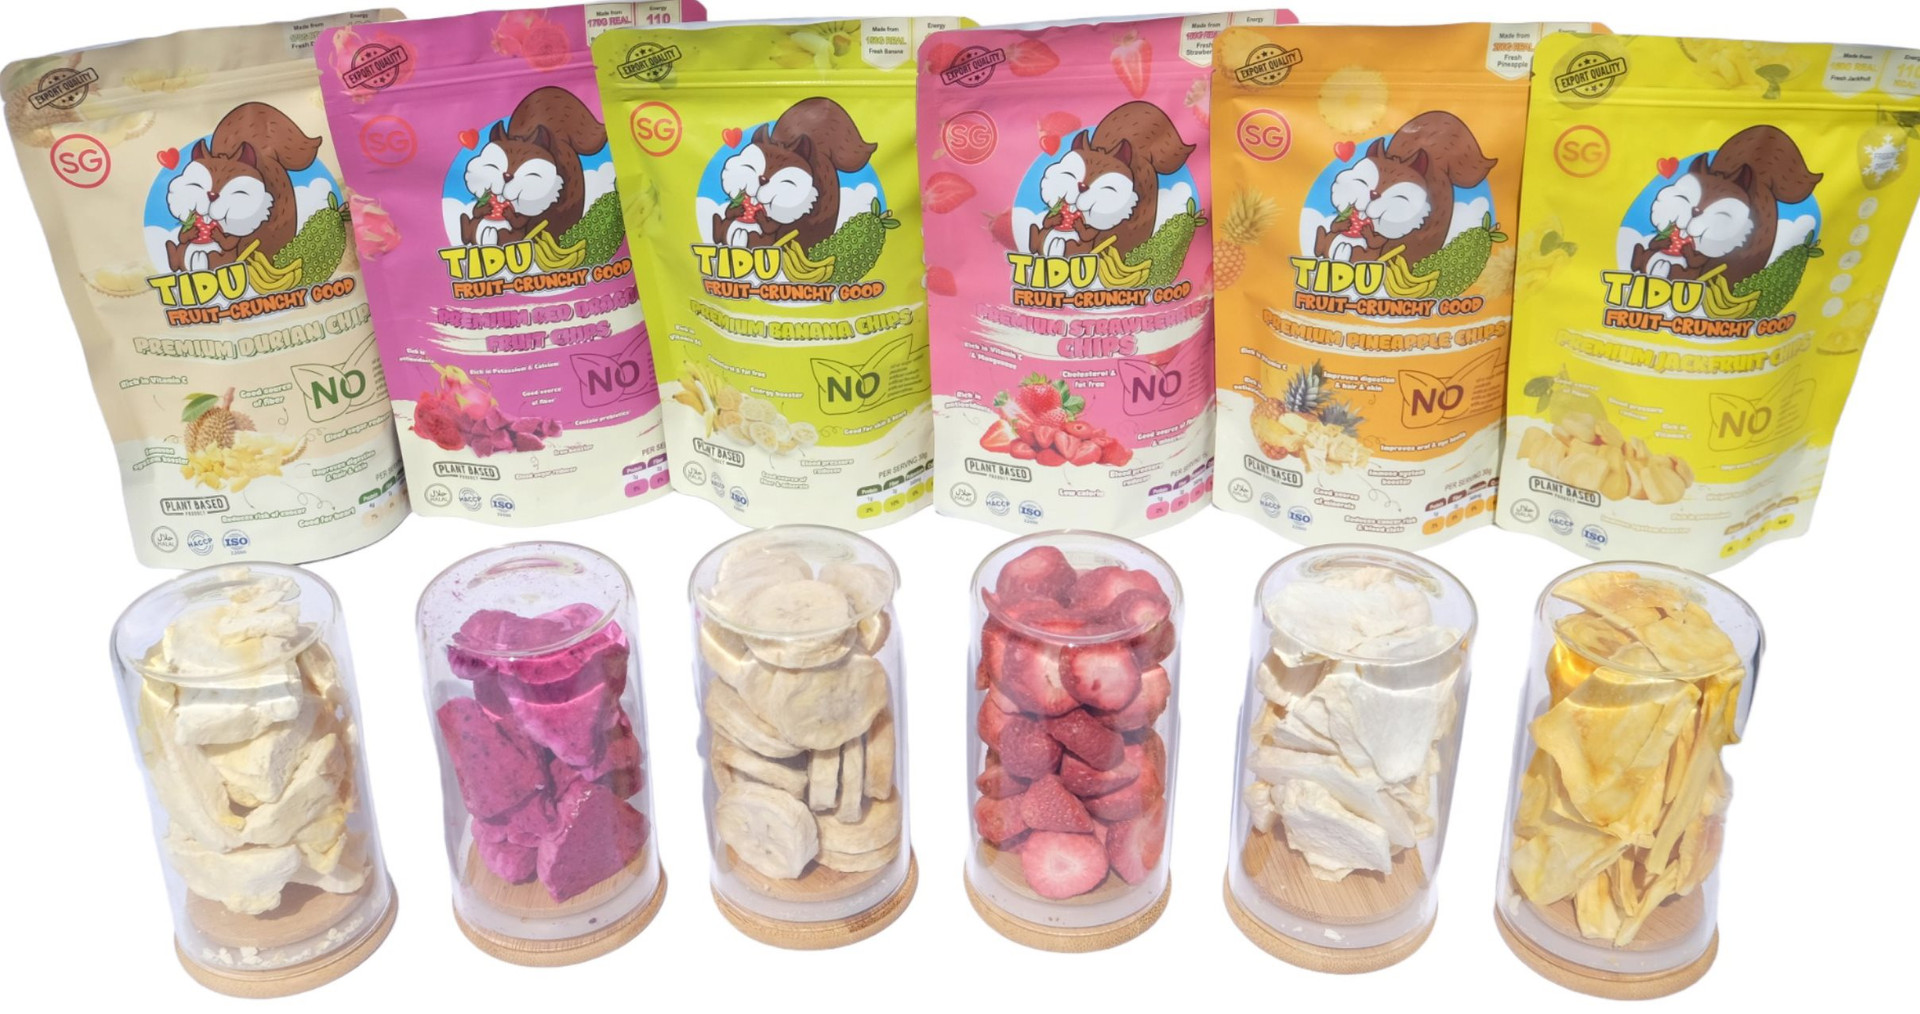 hinh-anh-sp-freeze-dried-food-vn.jpg